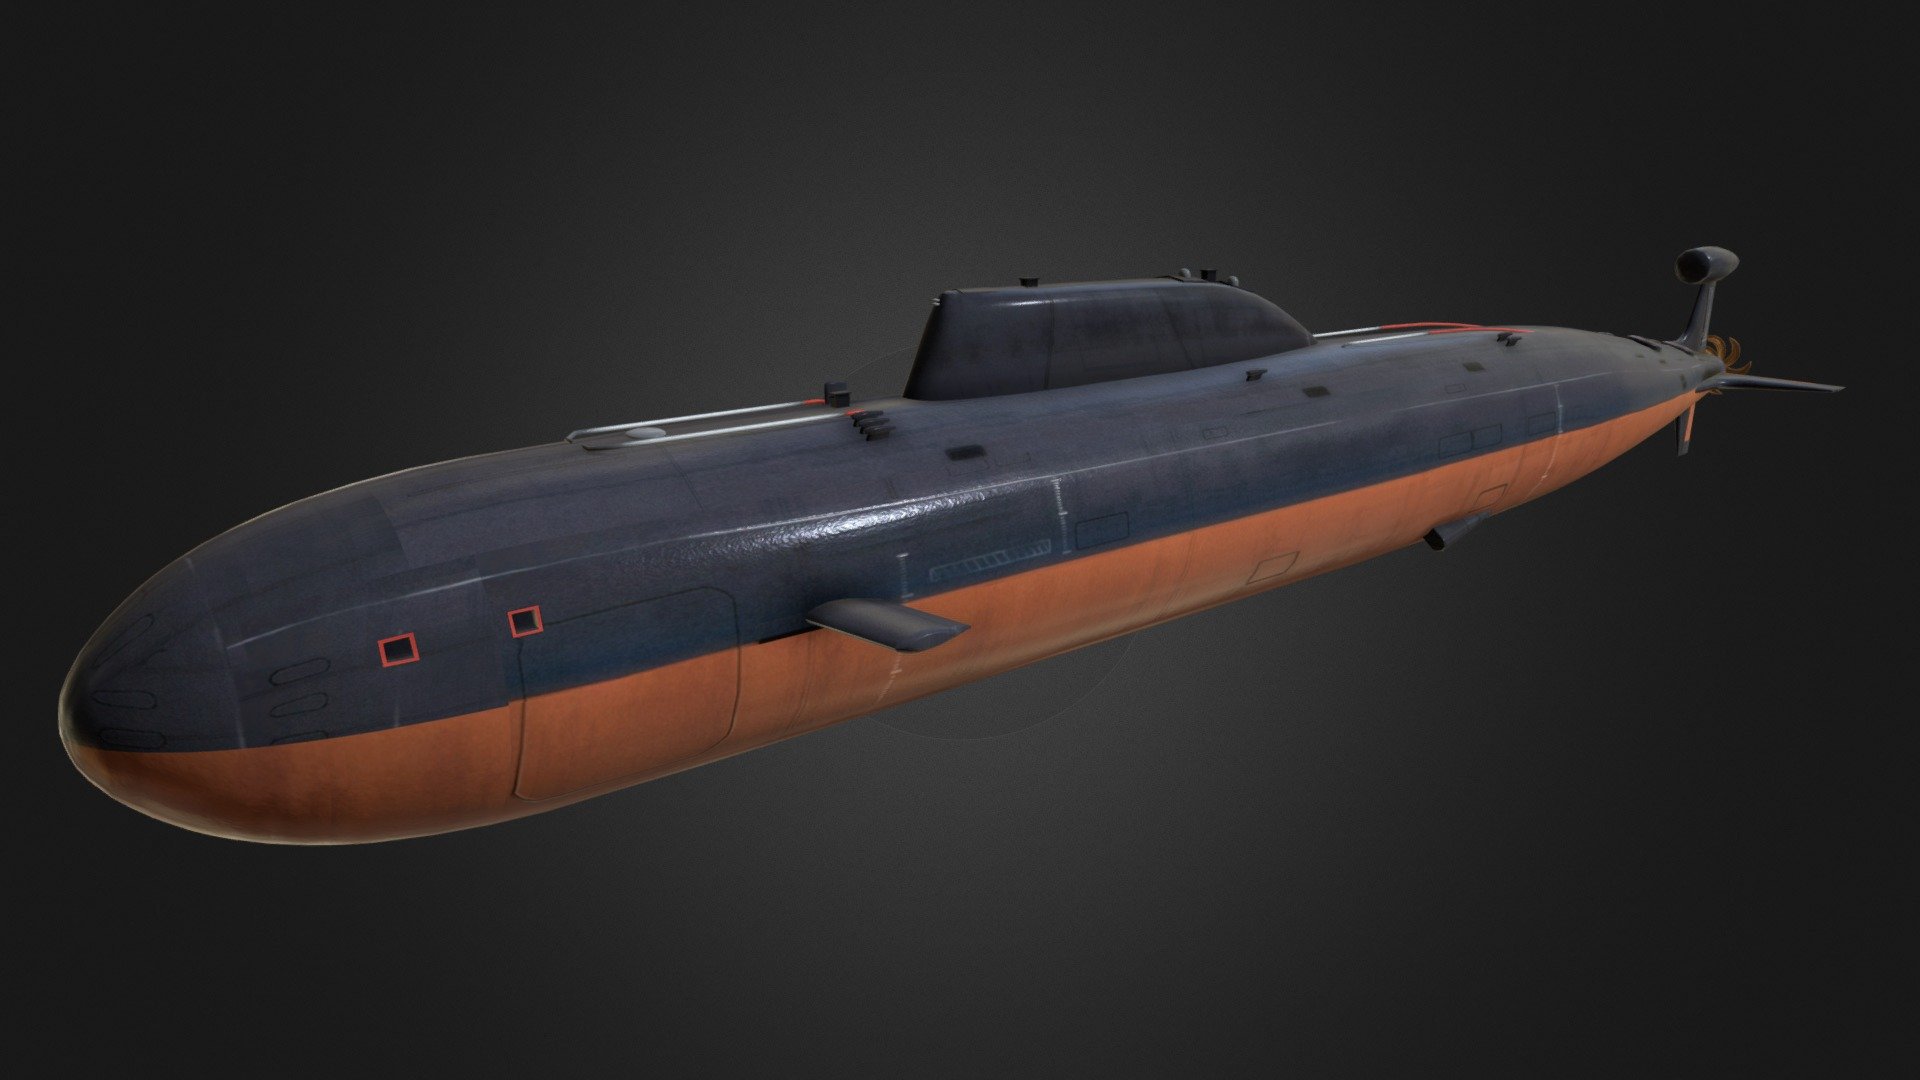 The nuclear submarine project 945 &ldquo;Barracuda